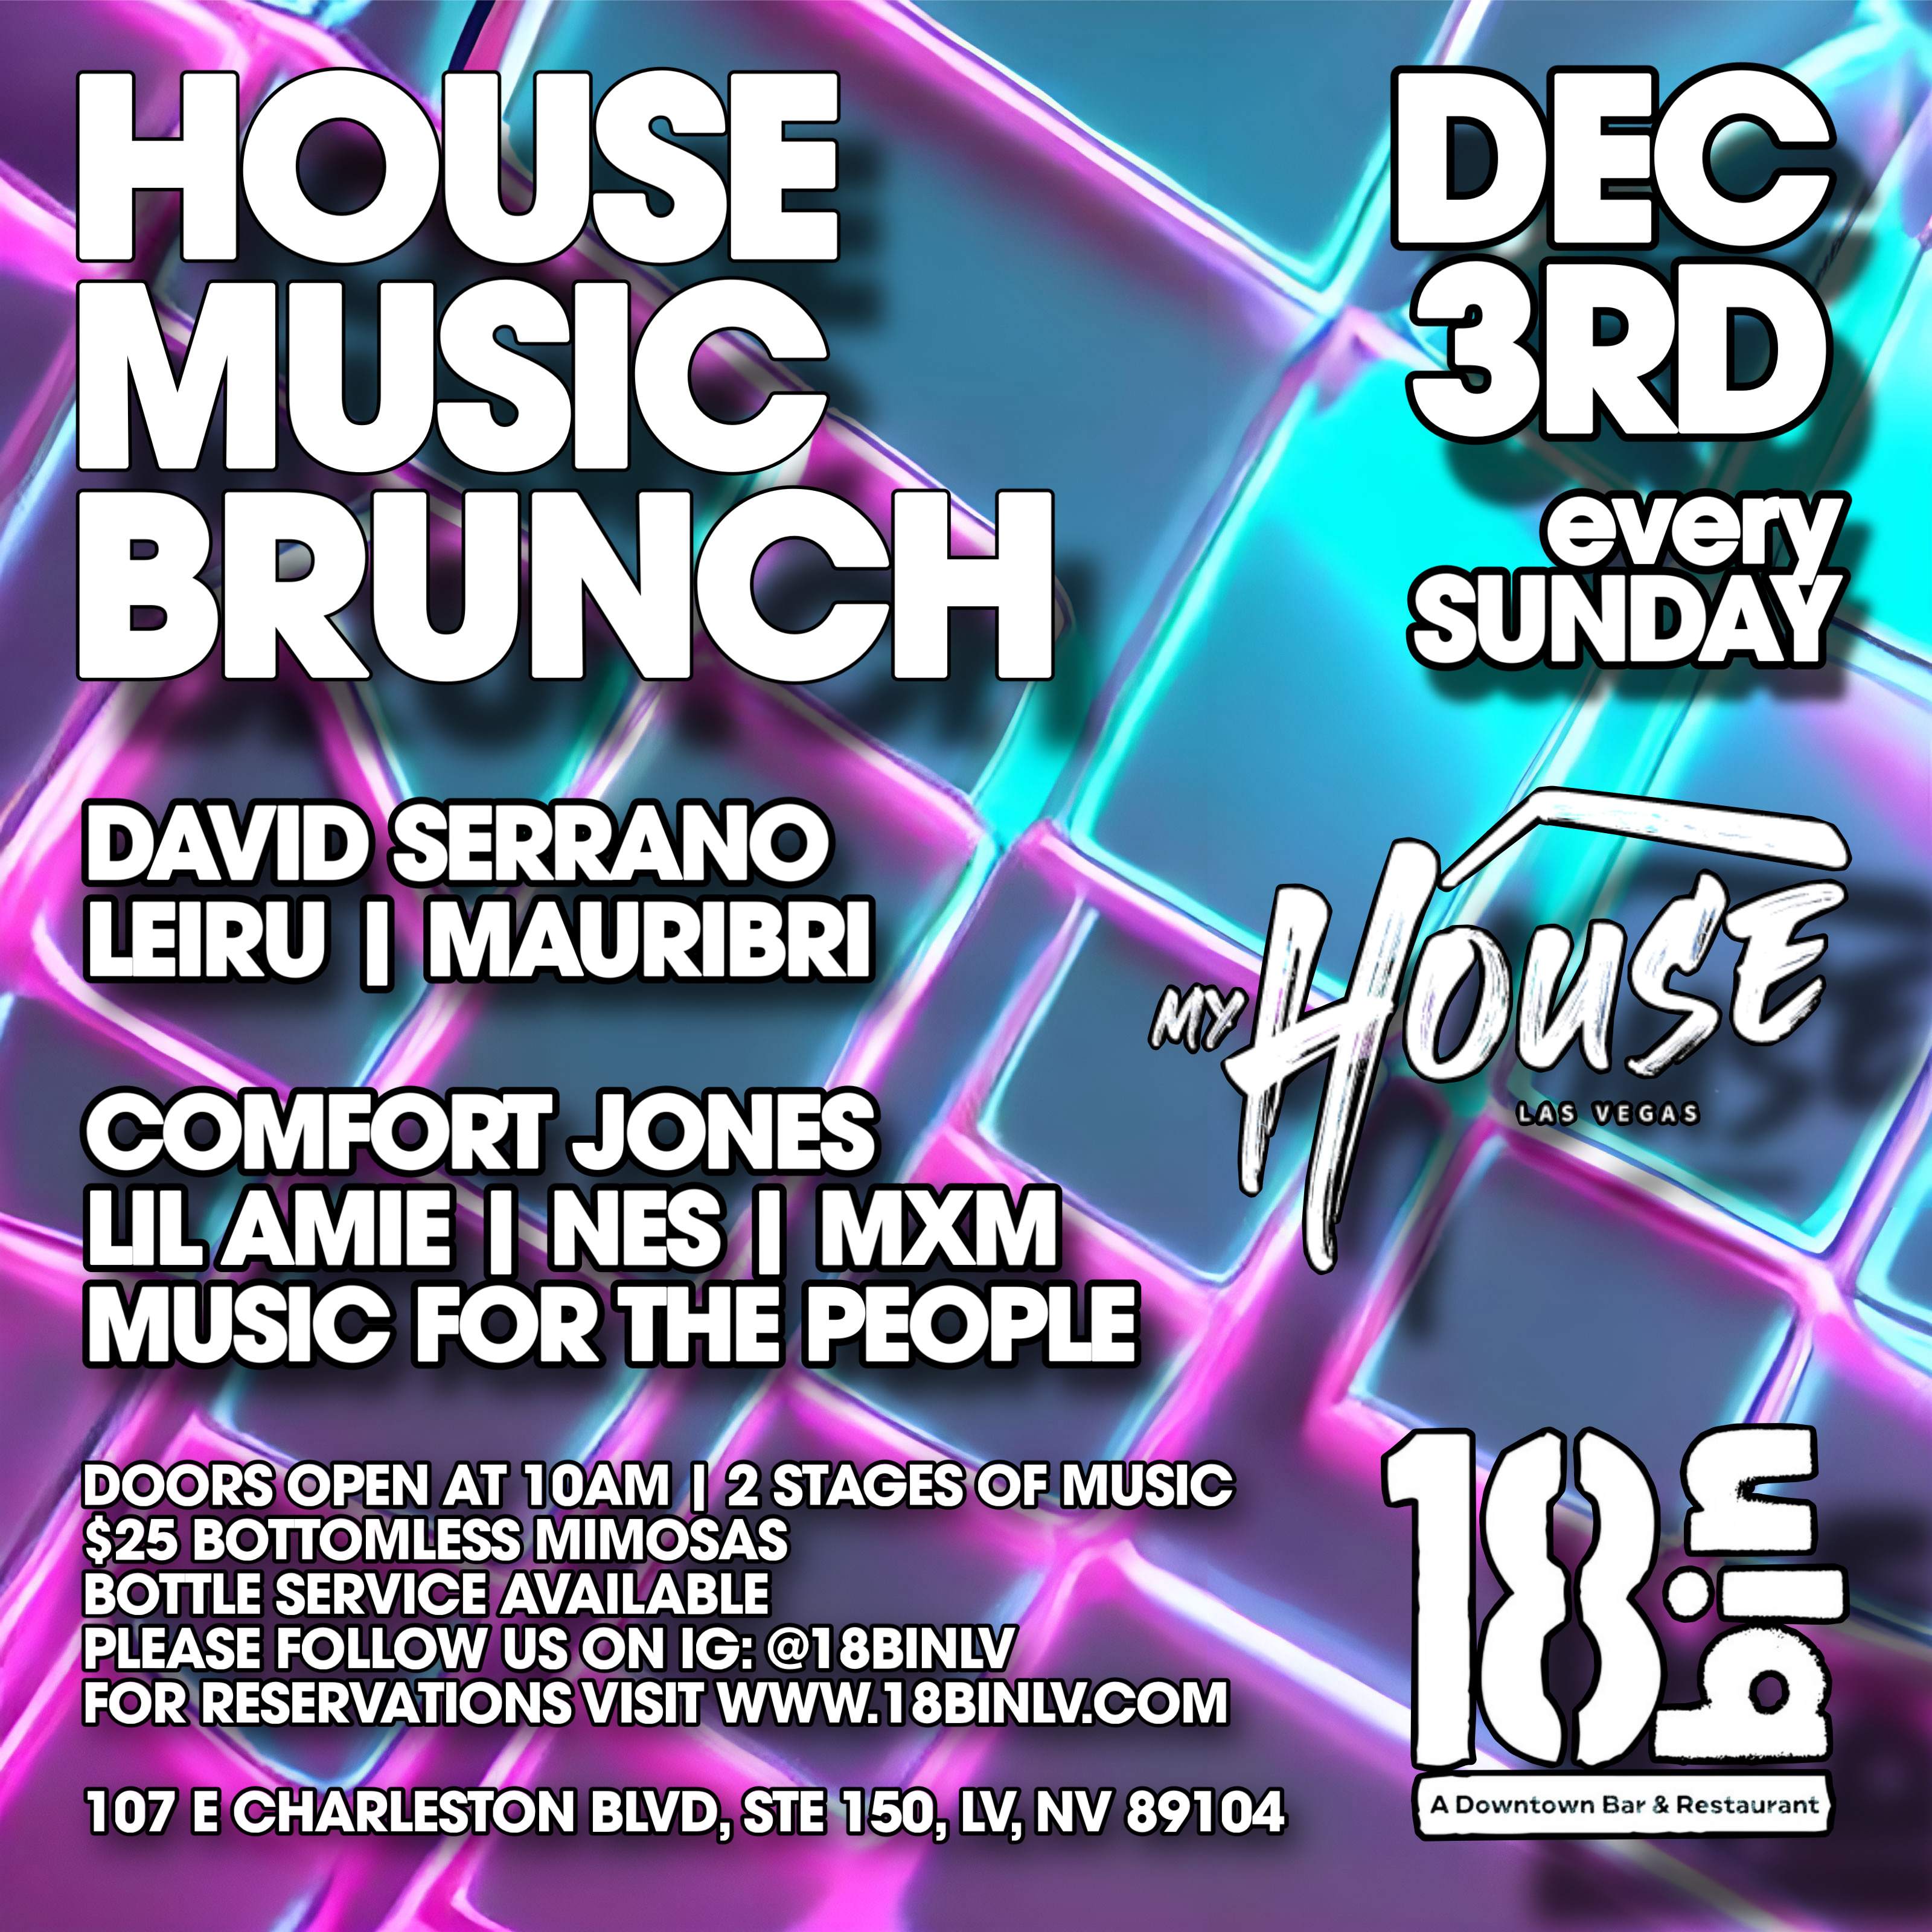 HOUSE MUSIC PARTY BRUNCH - フライヤー表